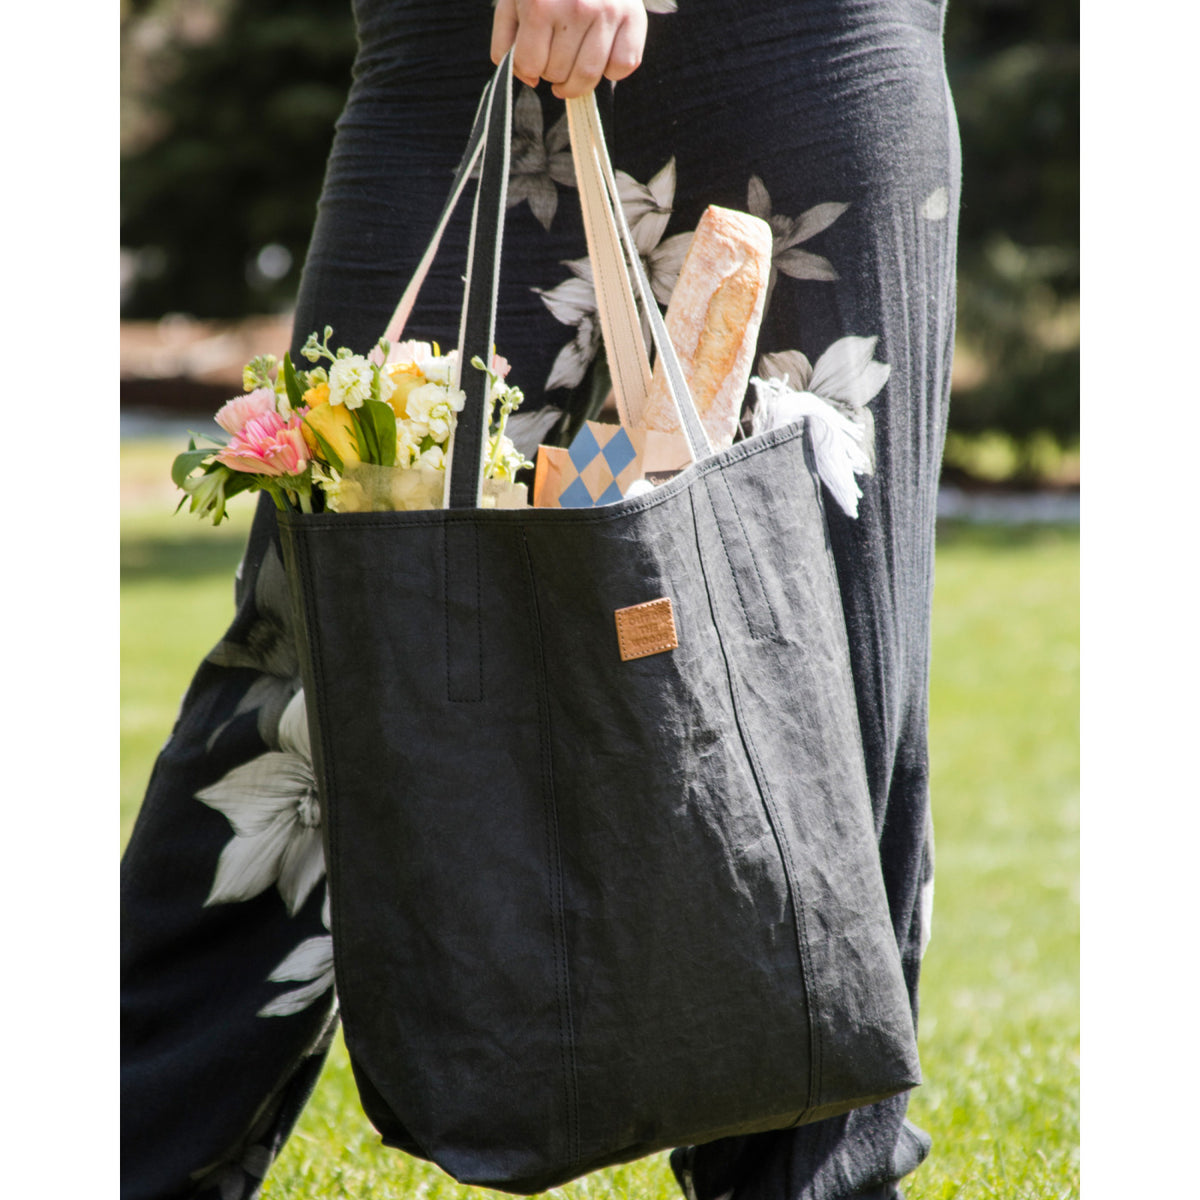 Out of The Woods® Iconic Shopper Tote